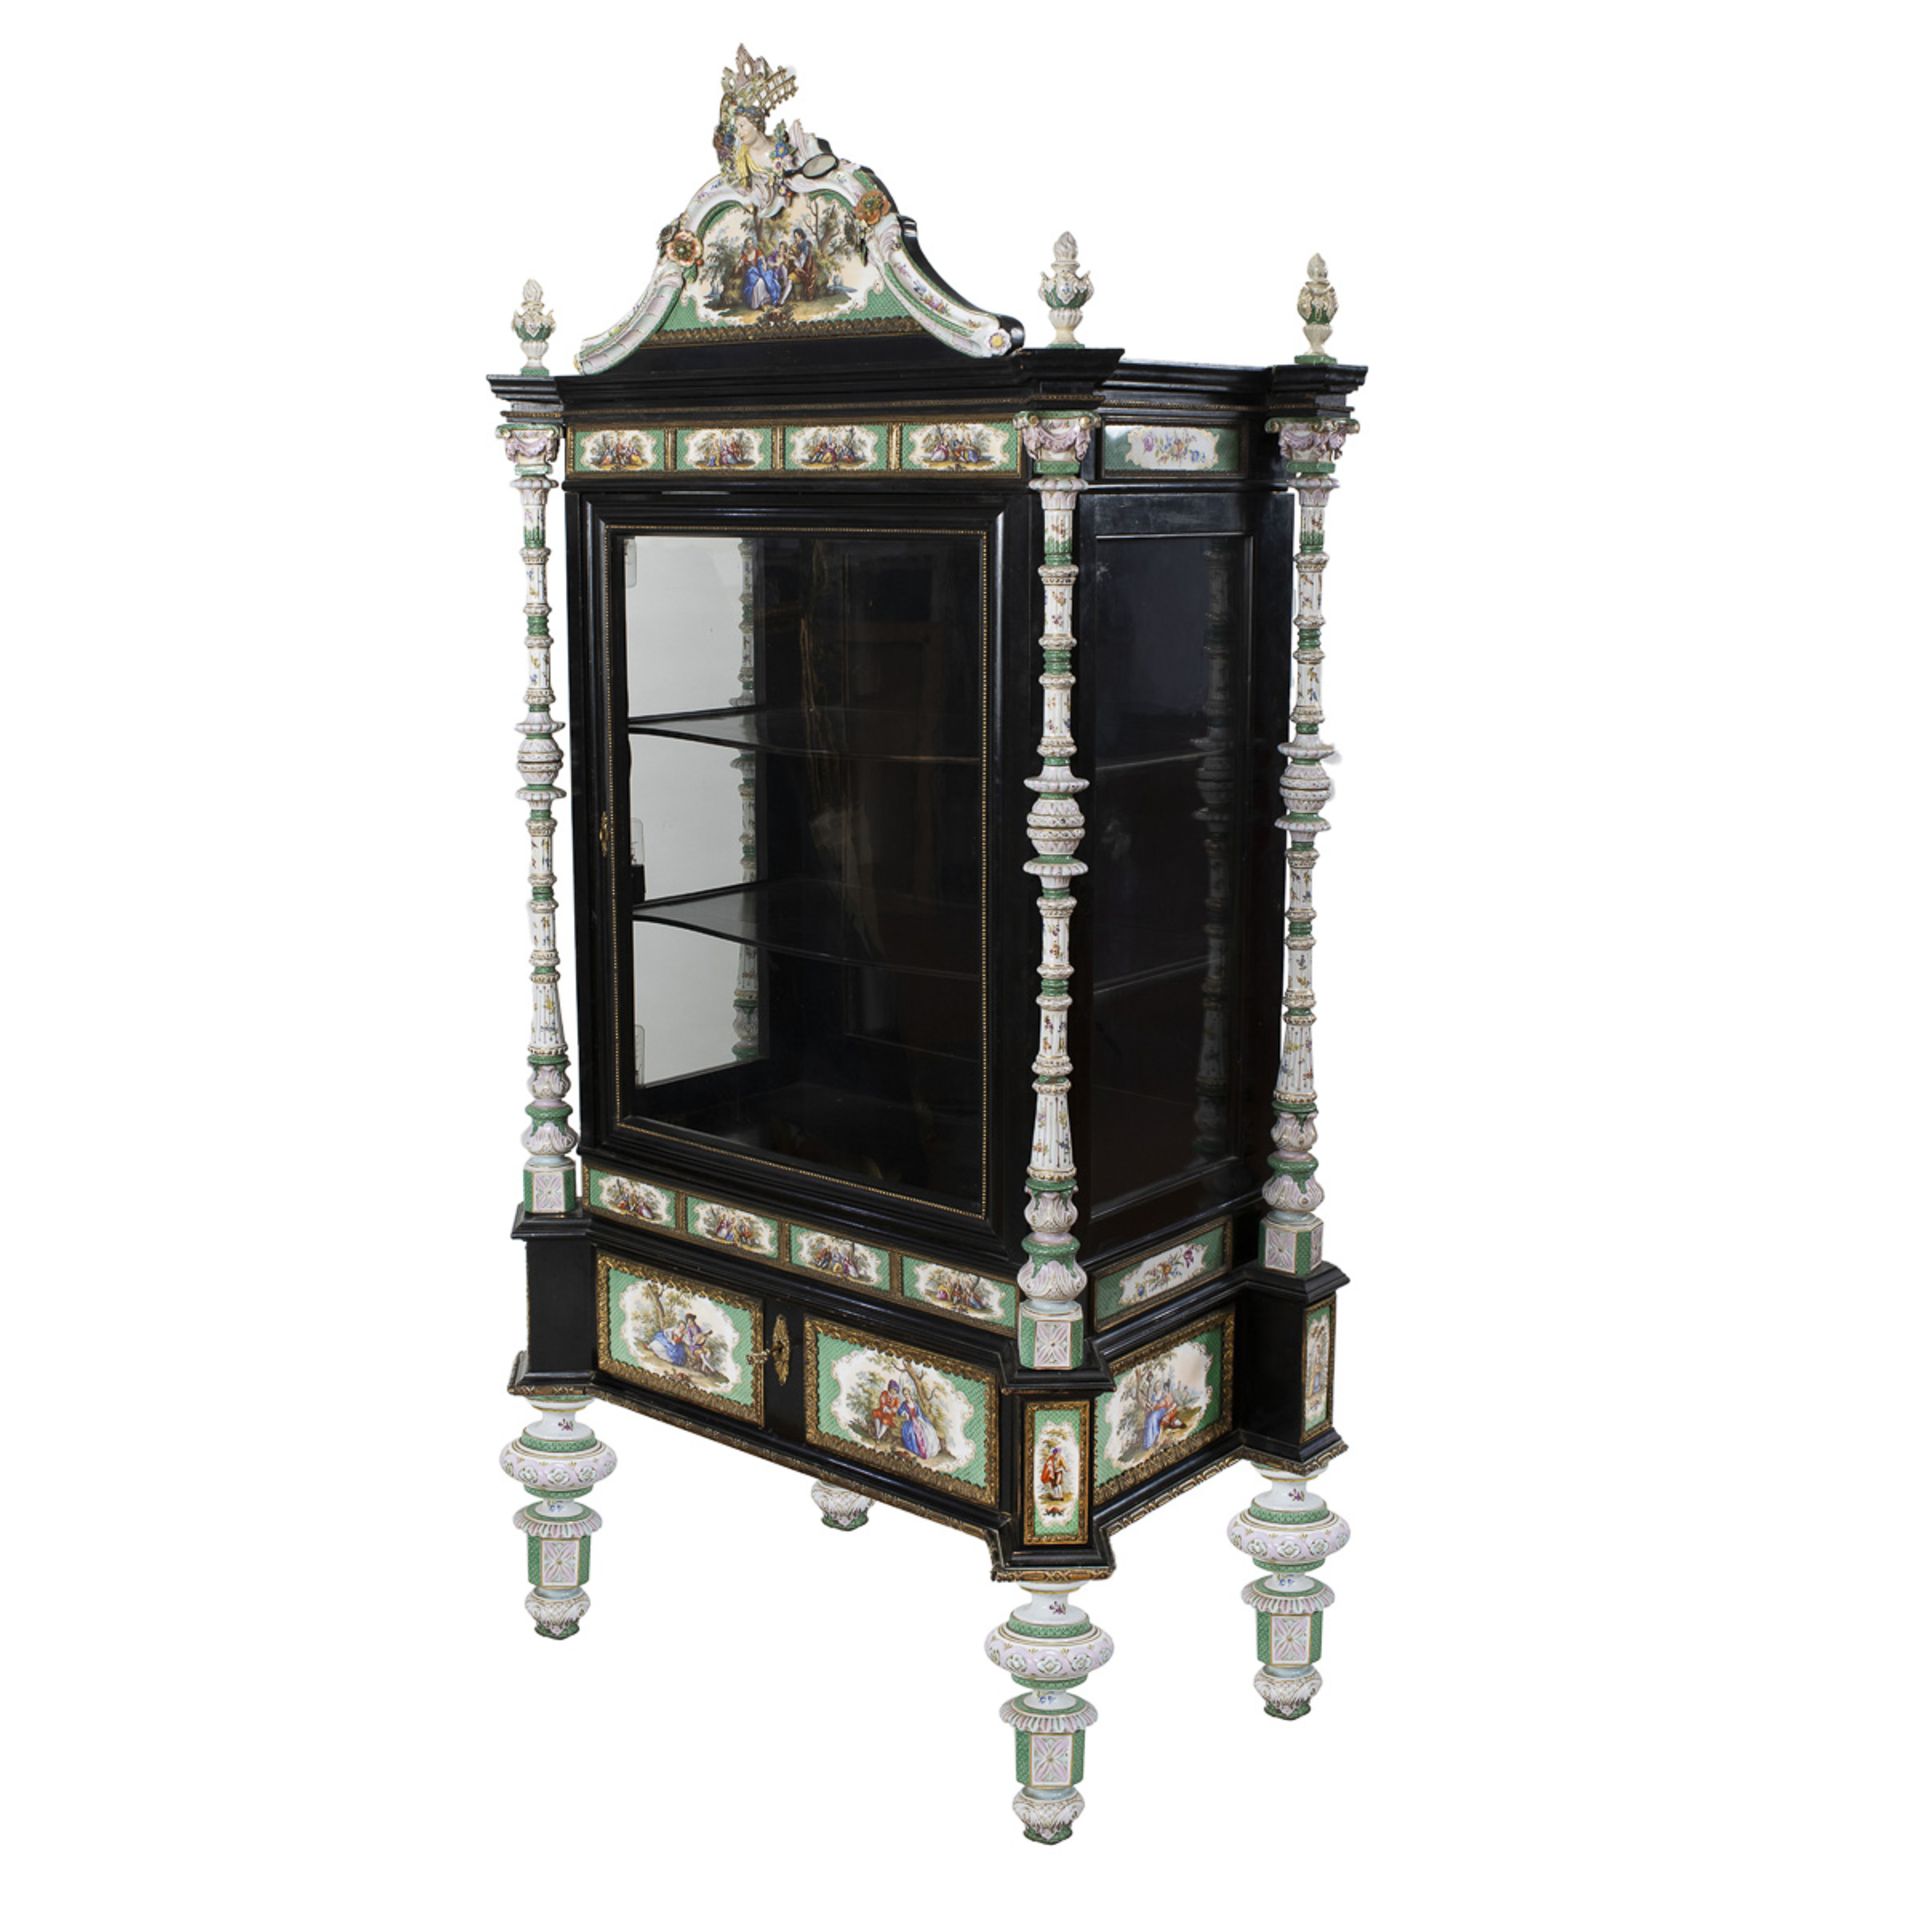 Wood and porcelain display cabinet